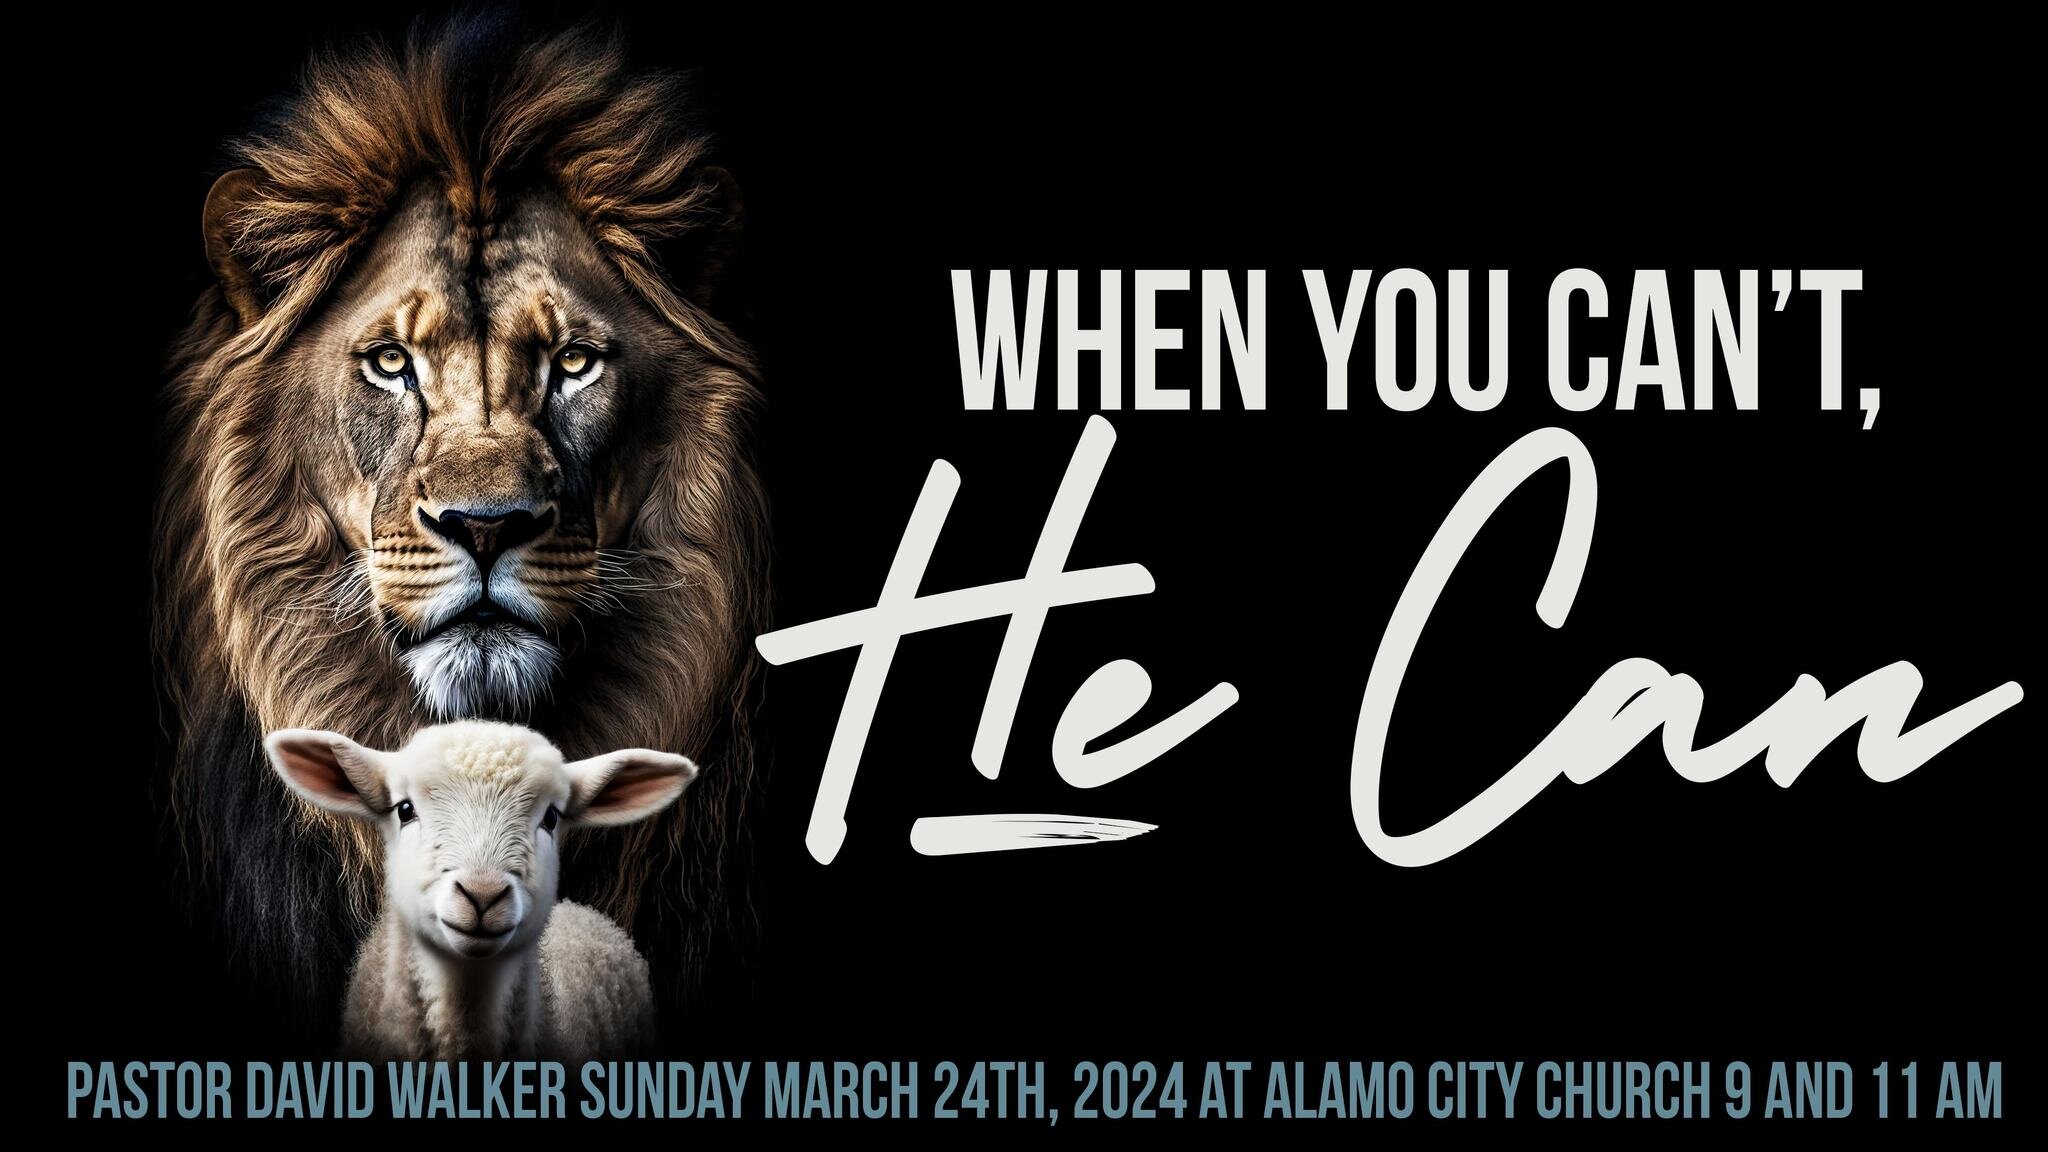 Join us TOMORROW at Alamo City!
We are thrilled to have Jillian Warman back with us to lead us into GOD'S presence tomorrow with our worship team.
Pastor Walker returns tomorrow to share a great message- &quot;When You Can't, He Can!&quot;
We have be